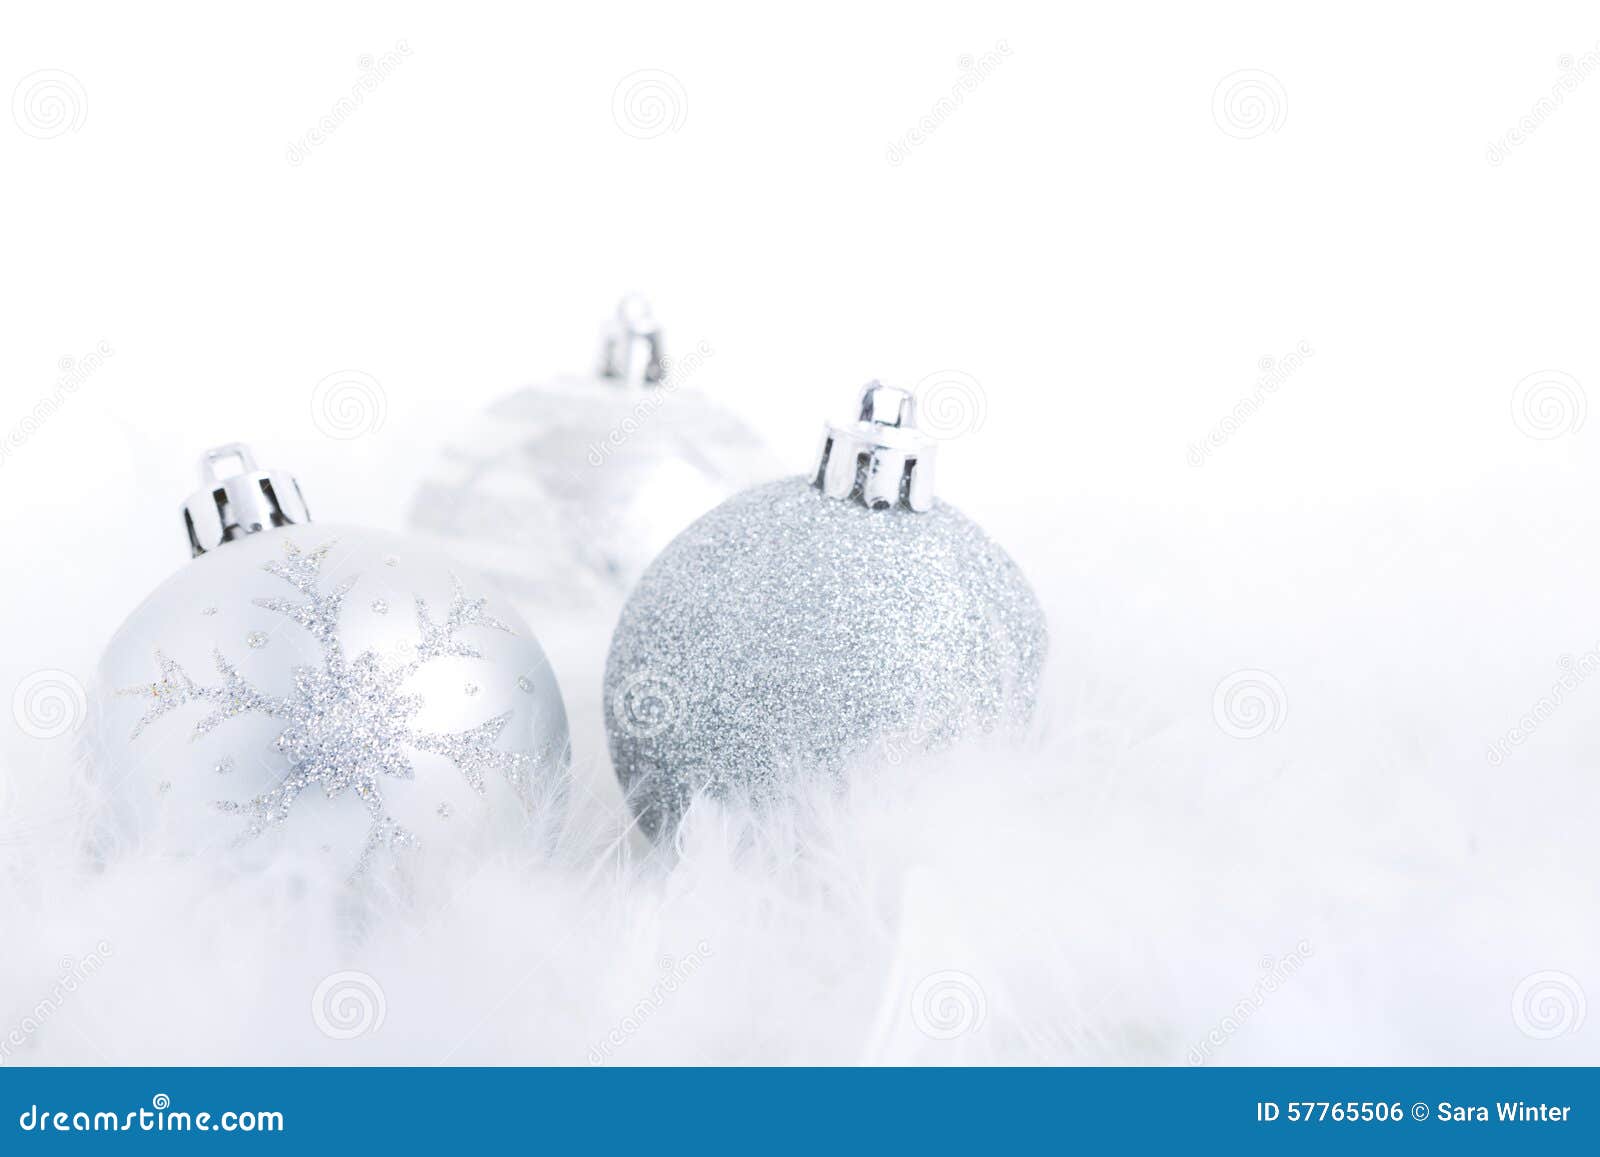 christmas baubles on a feathery surface, brightly lit